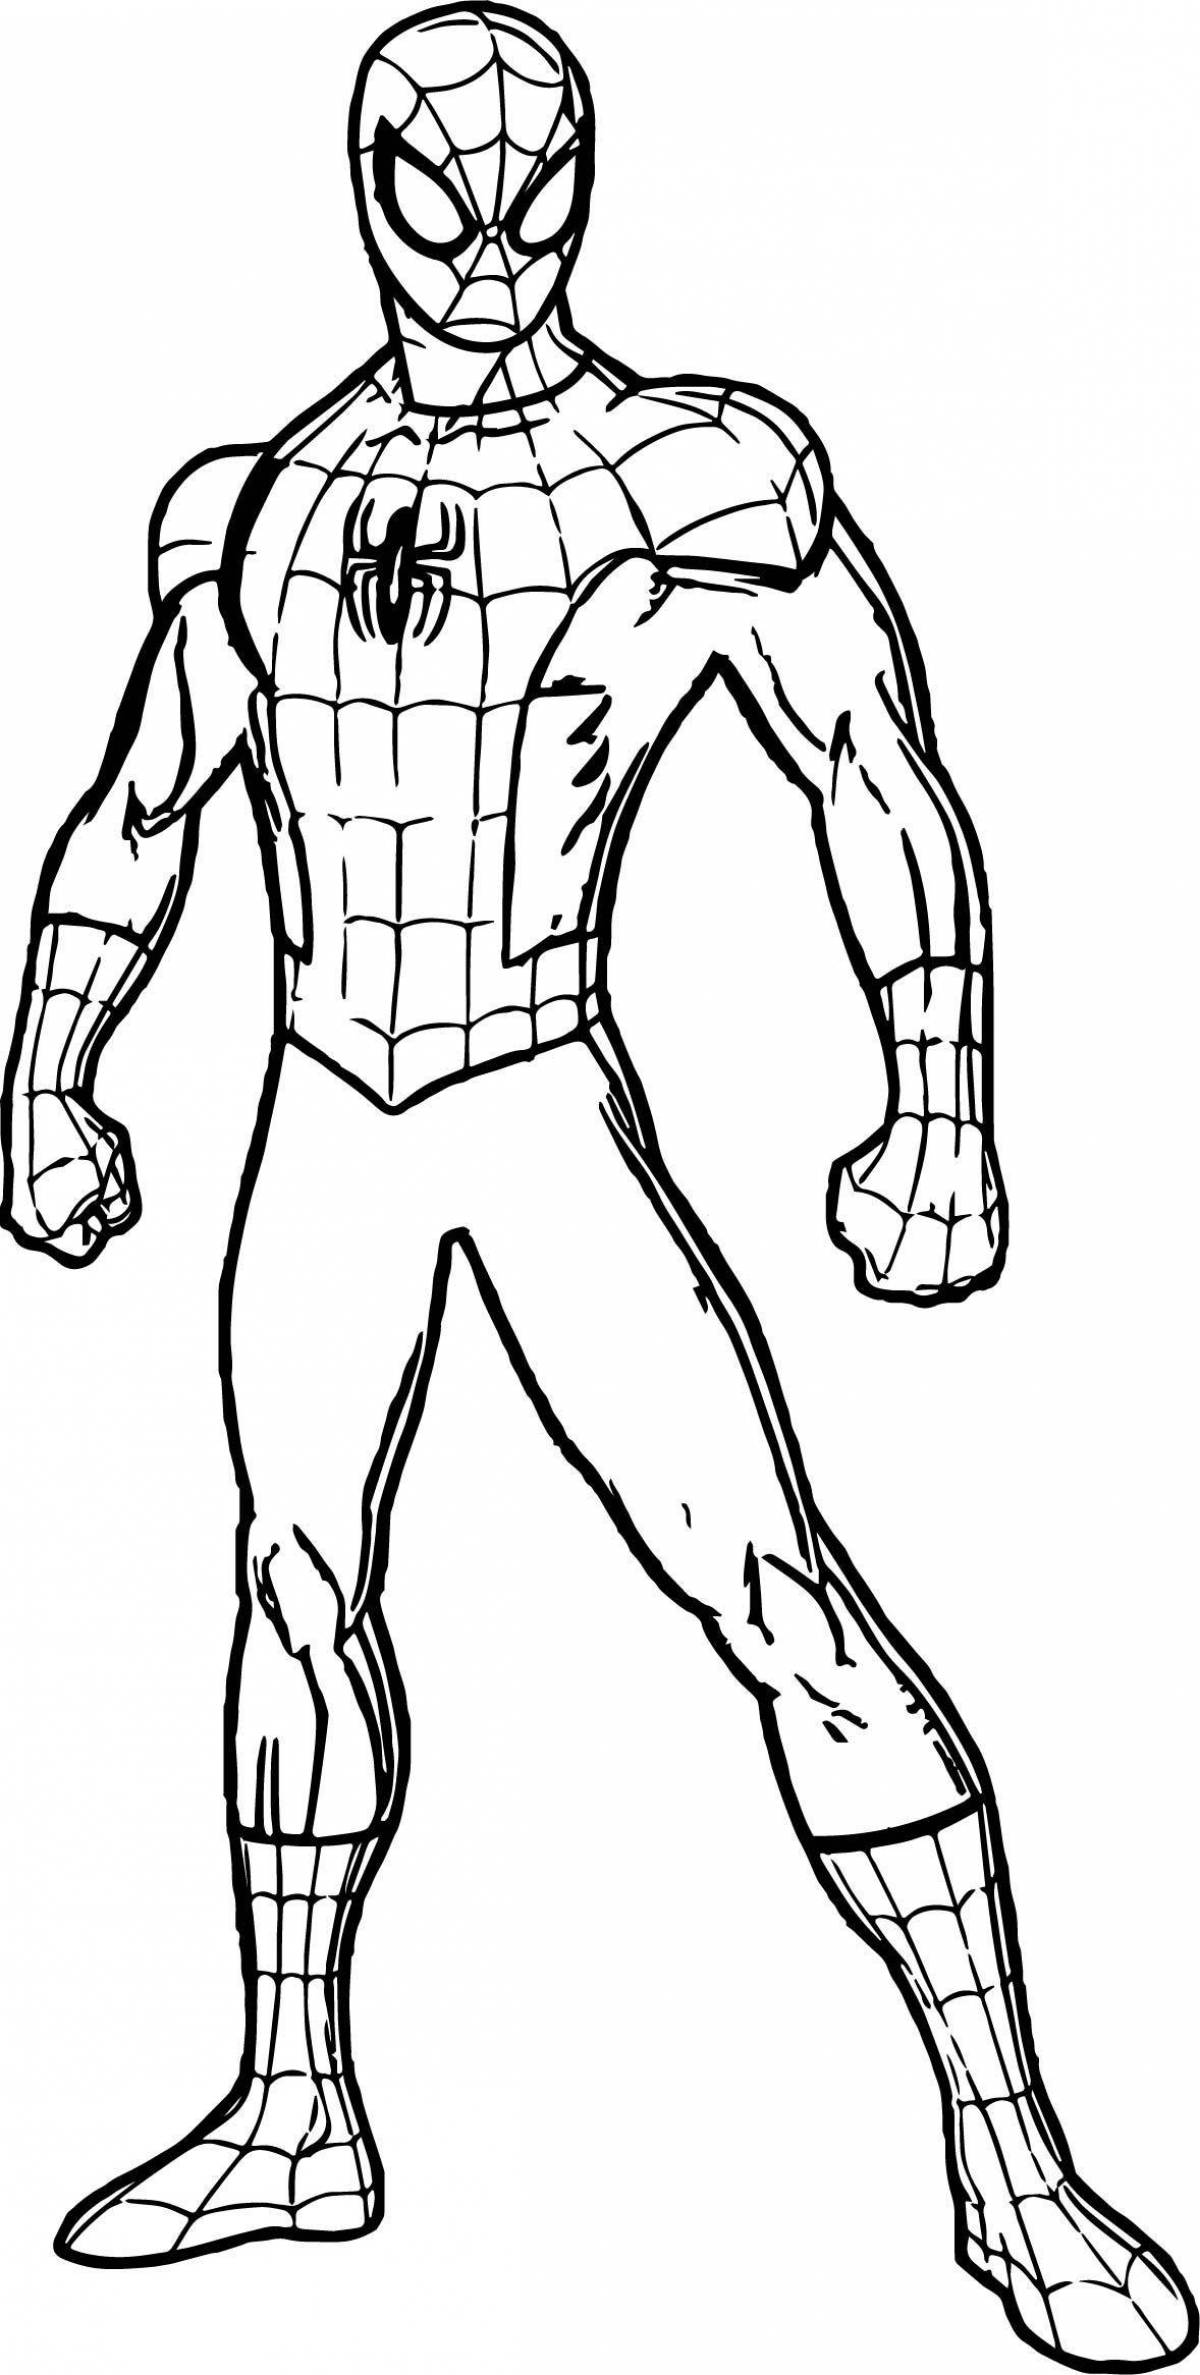 Comic spiderman coloring page for kids